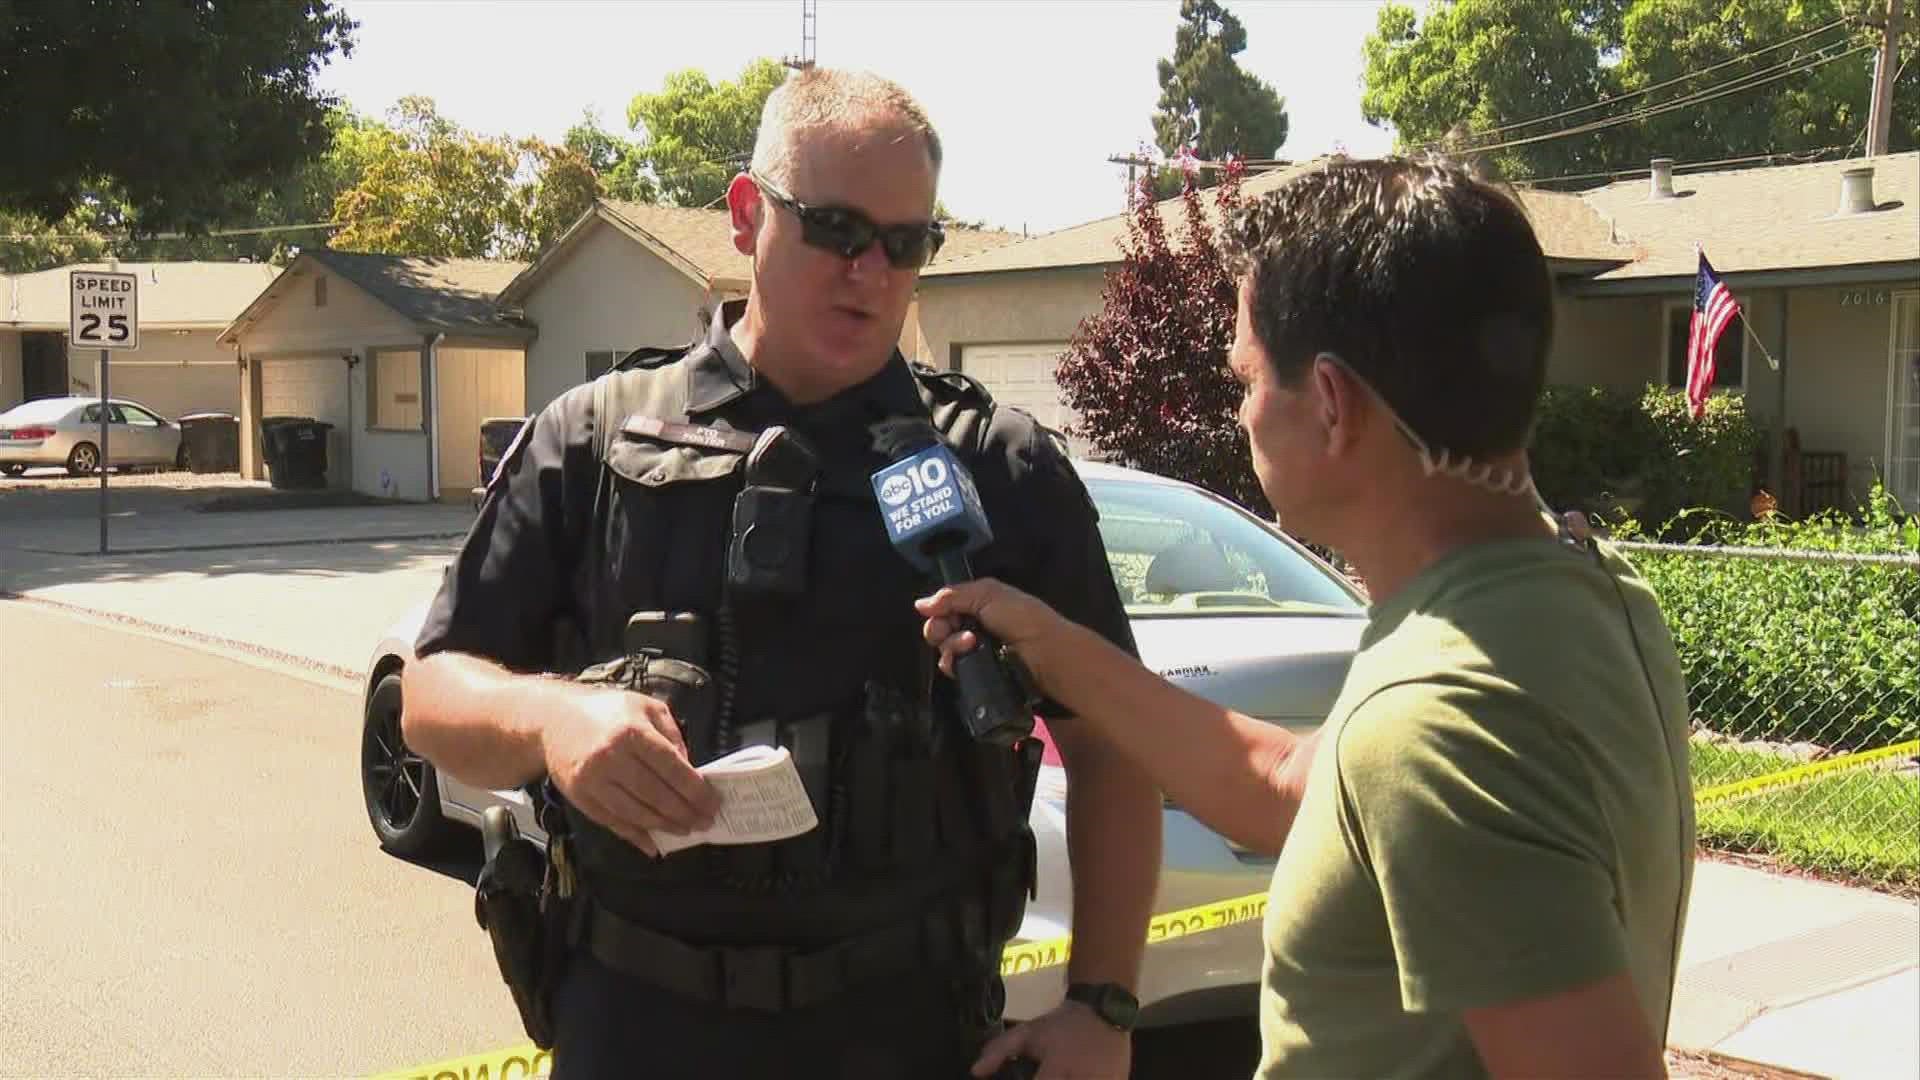 Law enforcement officials say it all began around 2 a.m. when they received reports of shots fired at a home in west Modesto.